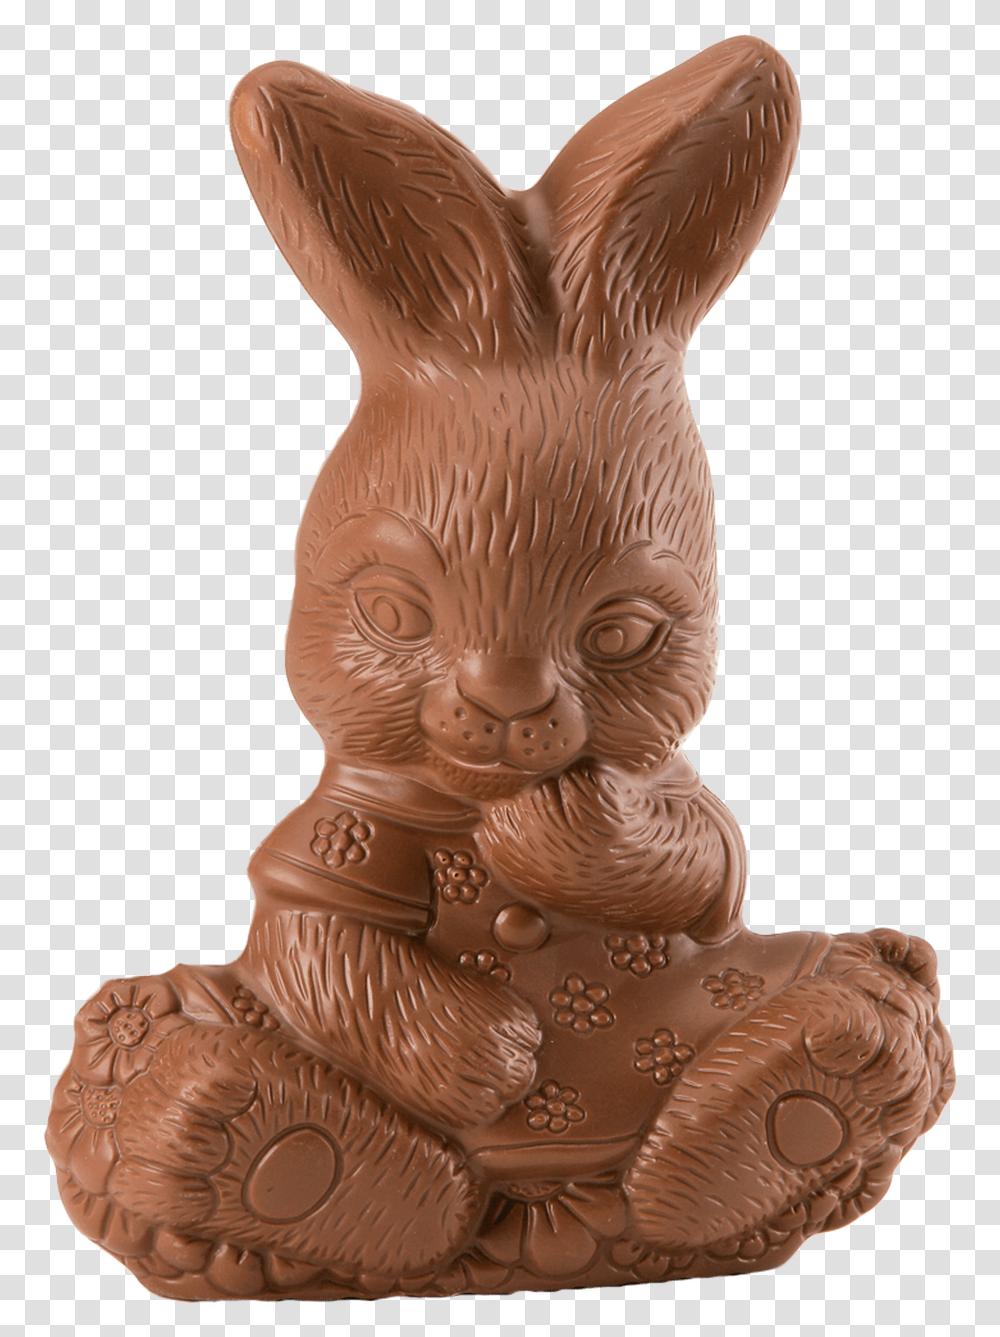 Chocolate Nicole Bunny Is Available In Milk Chocolate Figurine, Sweets, Food, Confectionery, Dessert Transparent Png